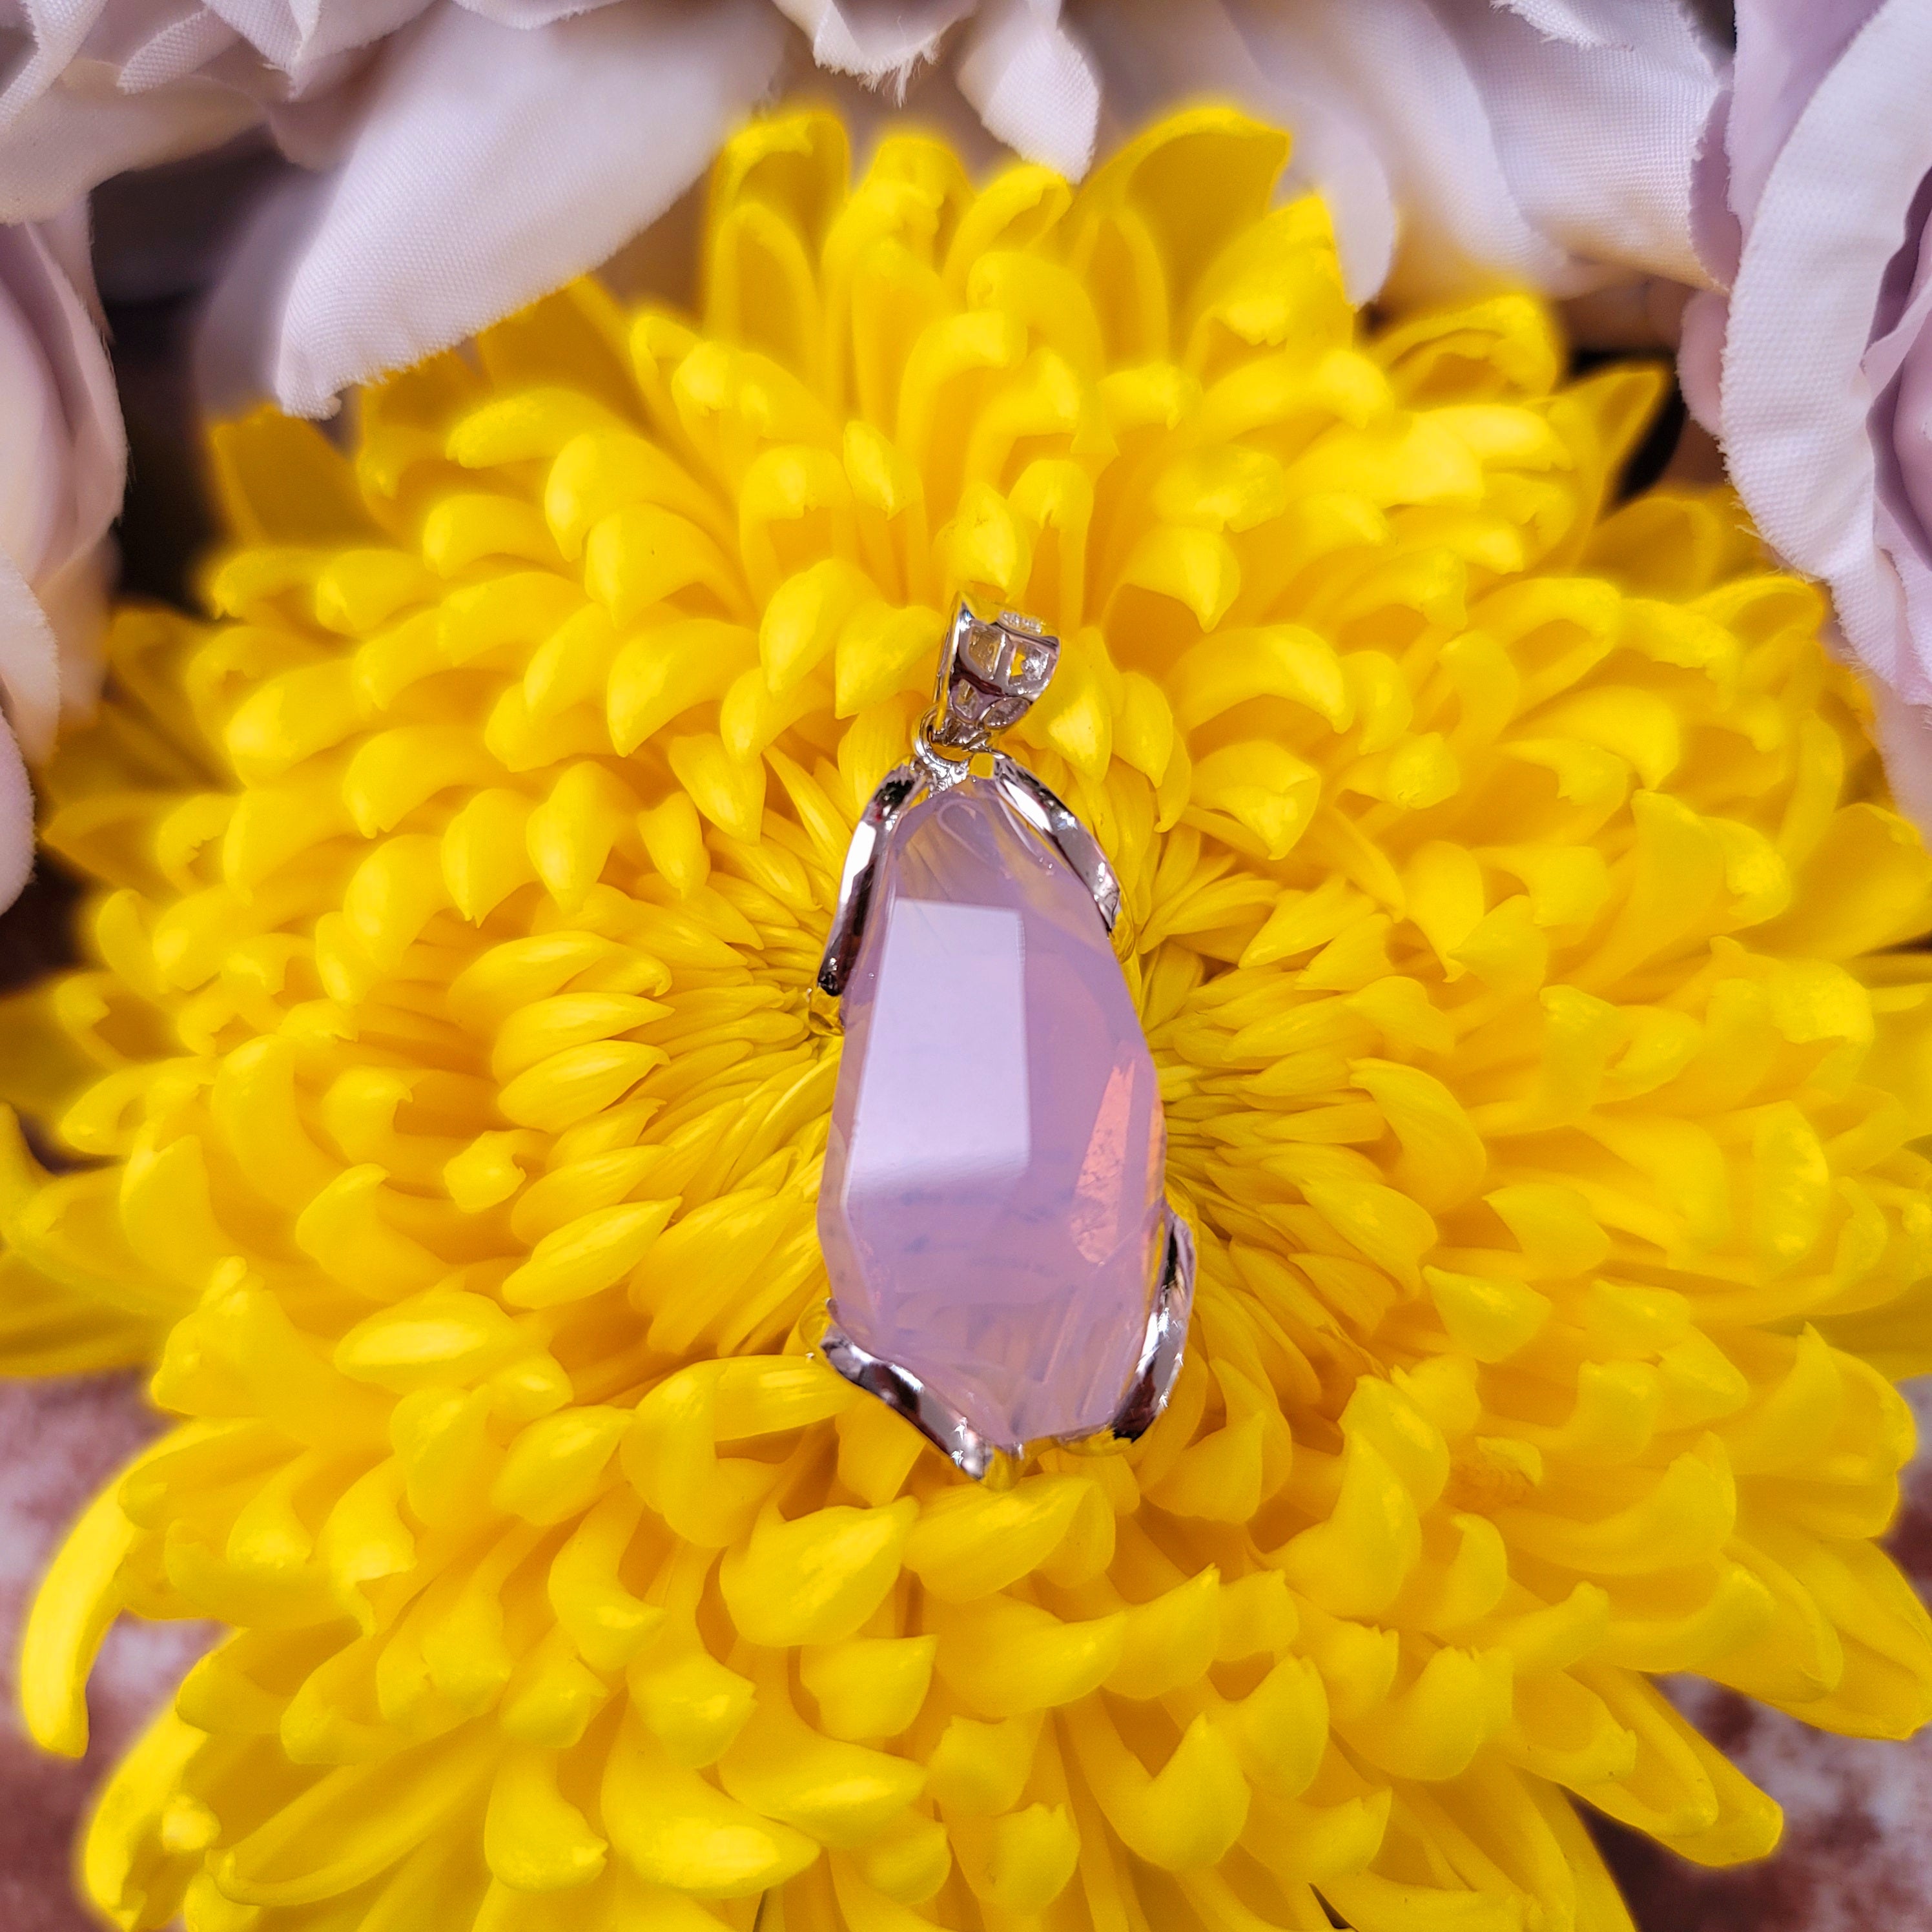 Amethyst "Lavender Moon Quartz" Goddess Pendant .925 Silver for Intuition and Guidance